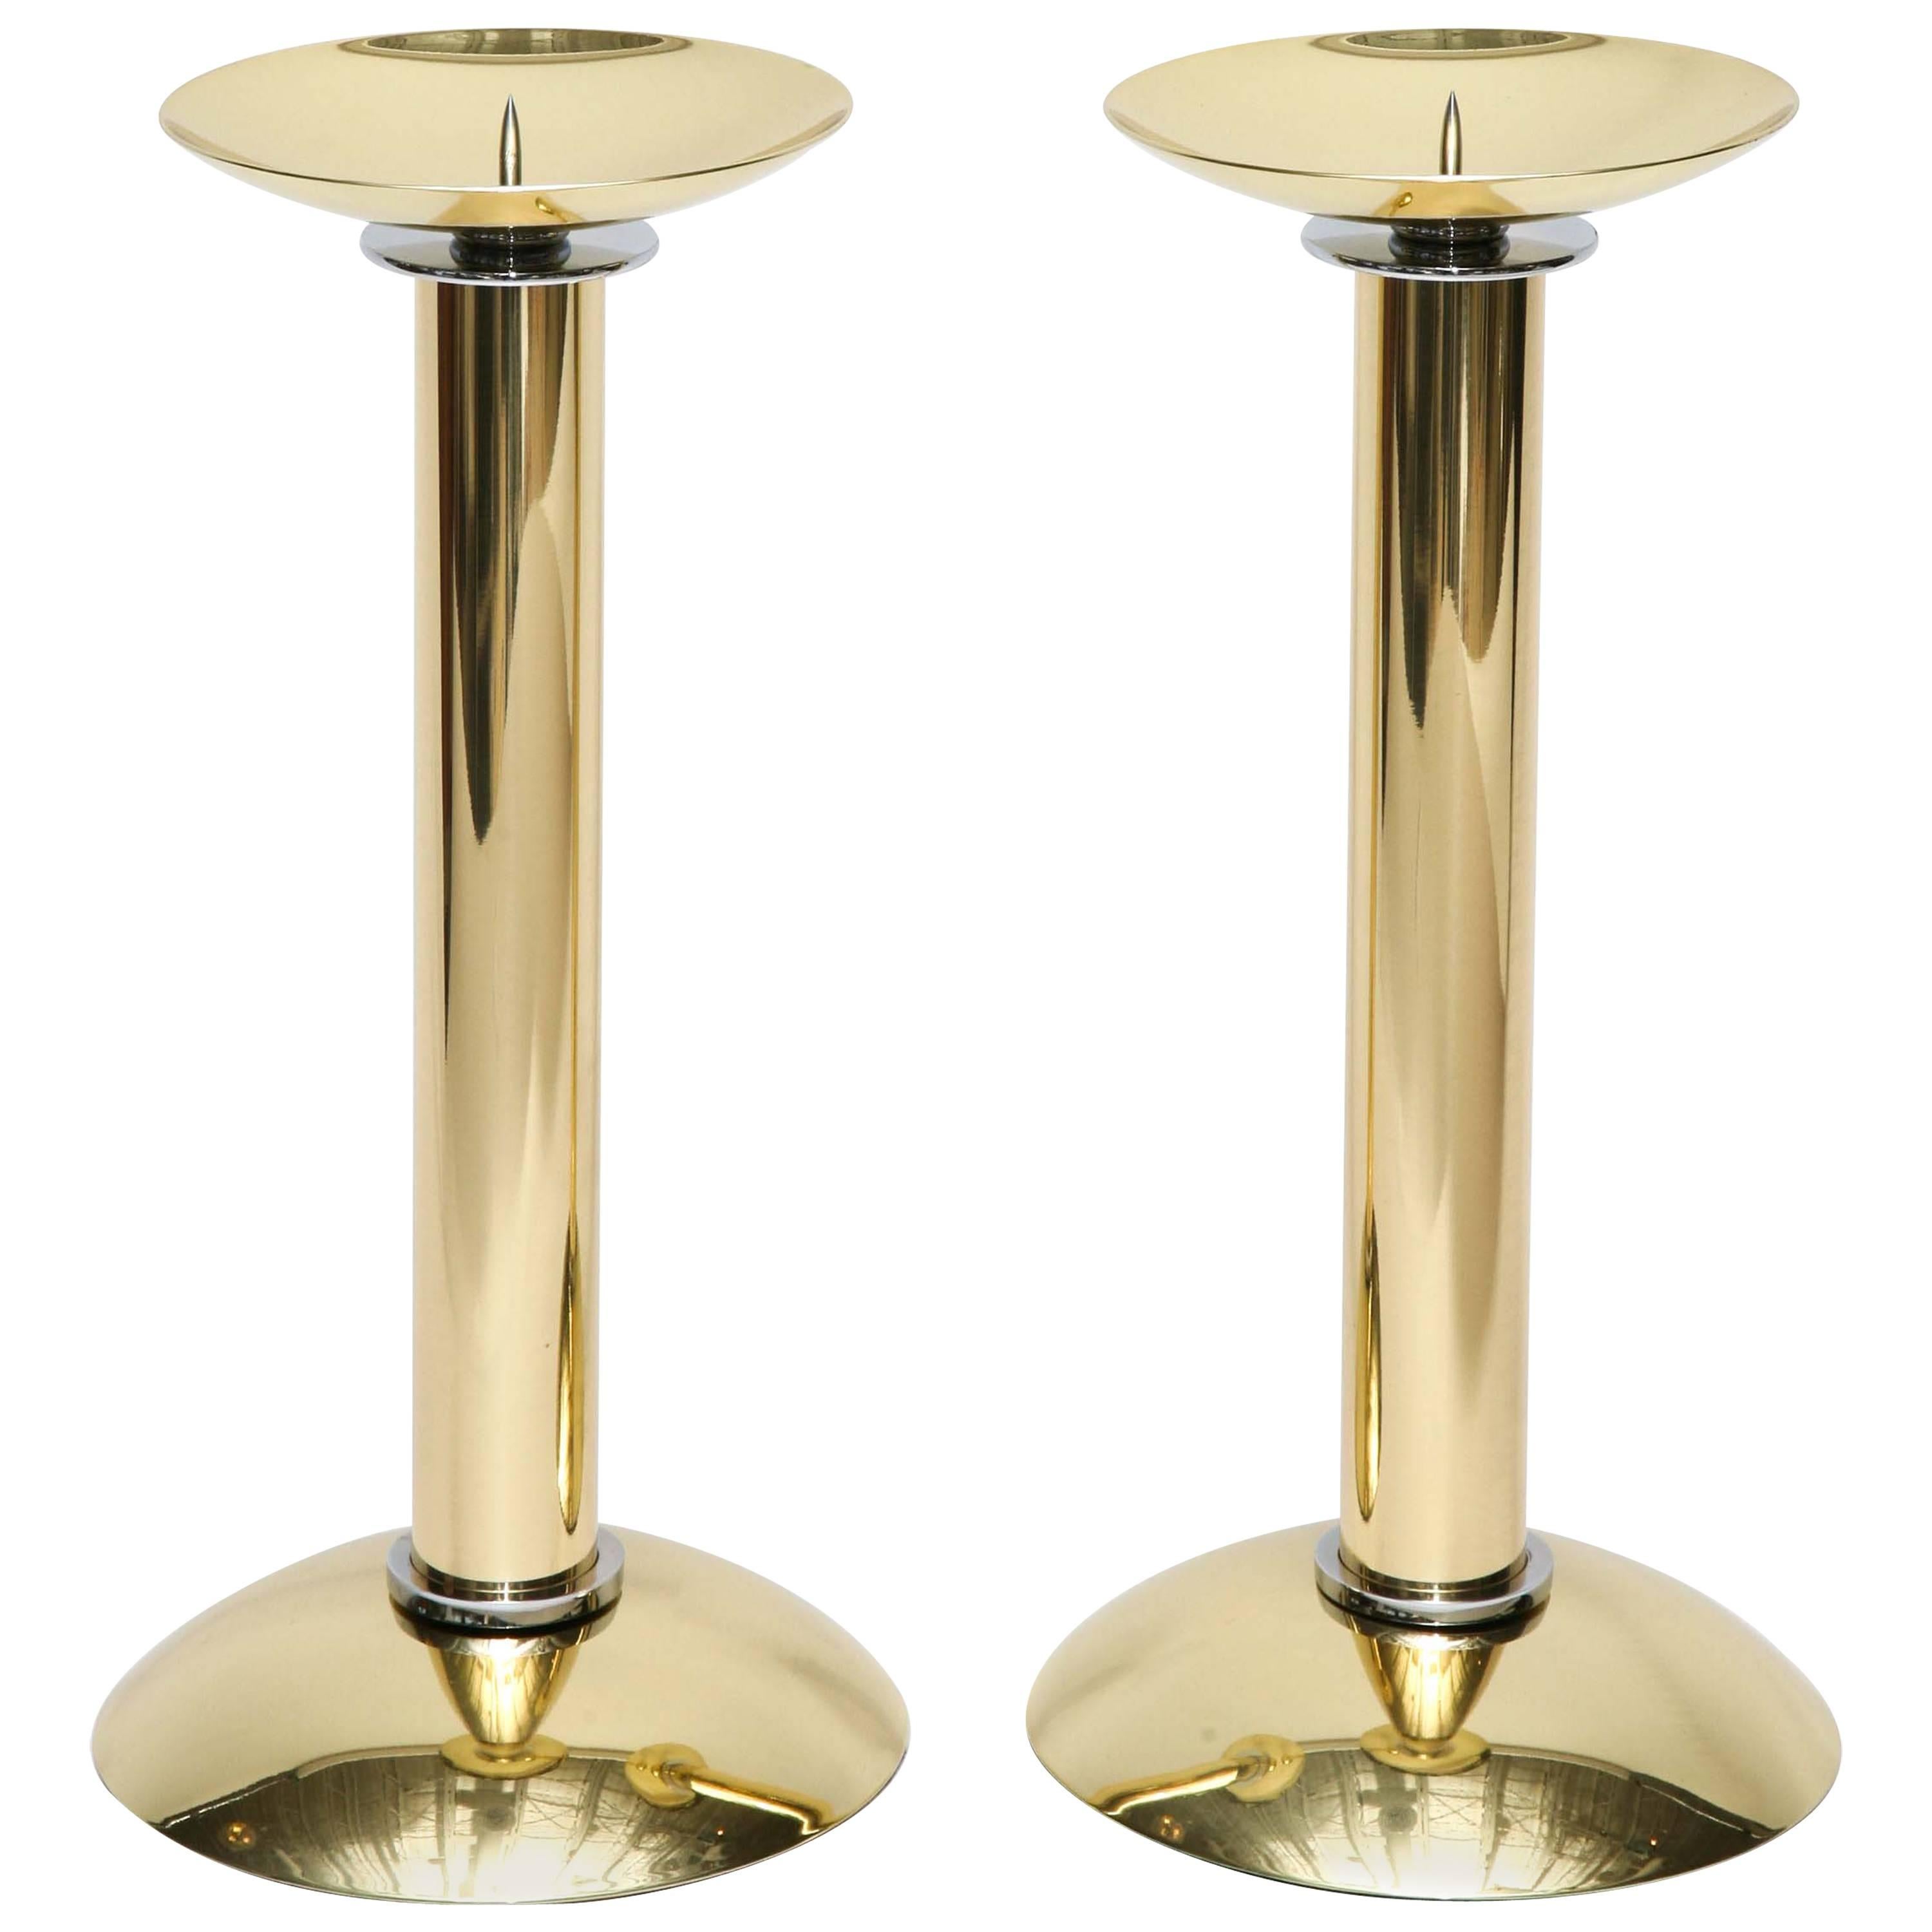 Pair of Polished Brass and Steel Candlesticks by Karl Springer